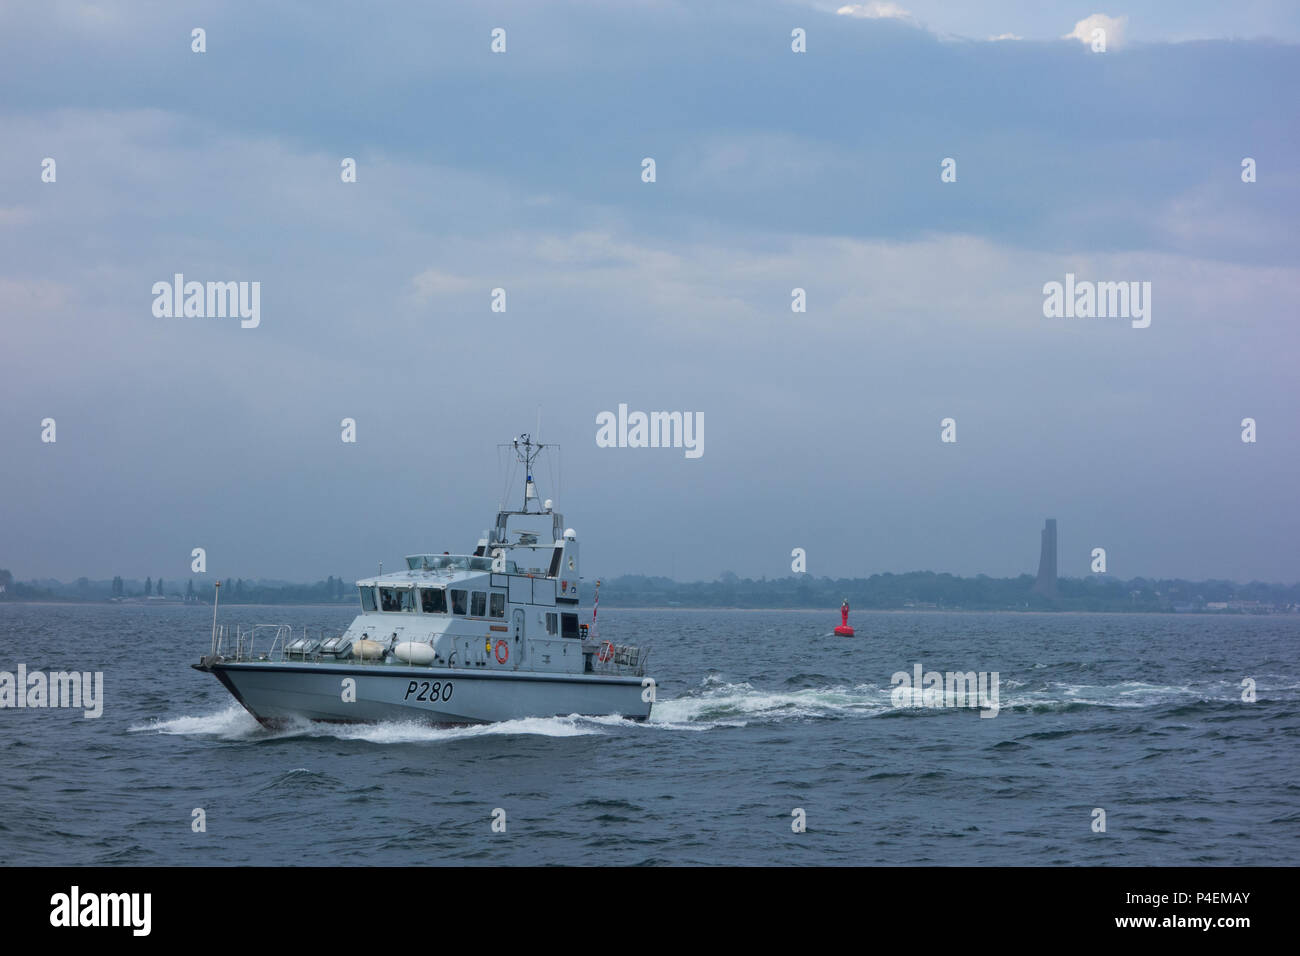 A Port side view of The Archer Class Patrol Vessel HMS Dasher P280, in transit in the North sea near the Baltic. Stock Photo